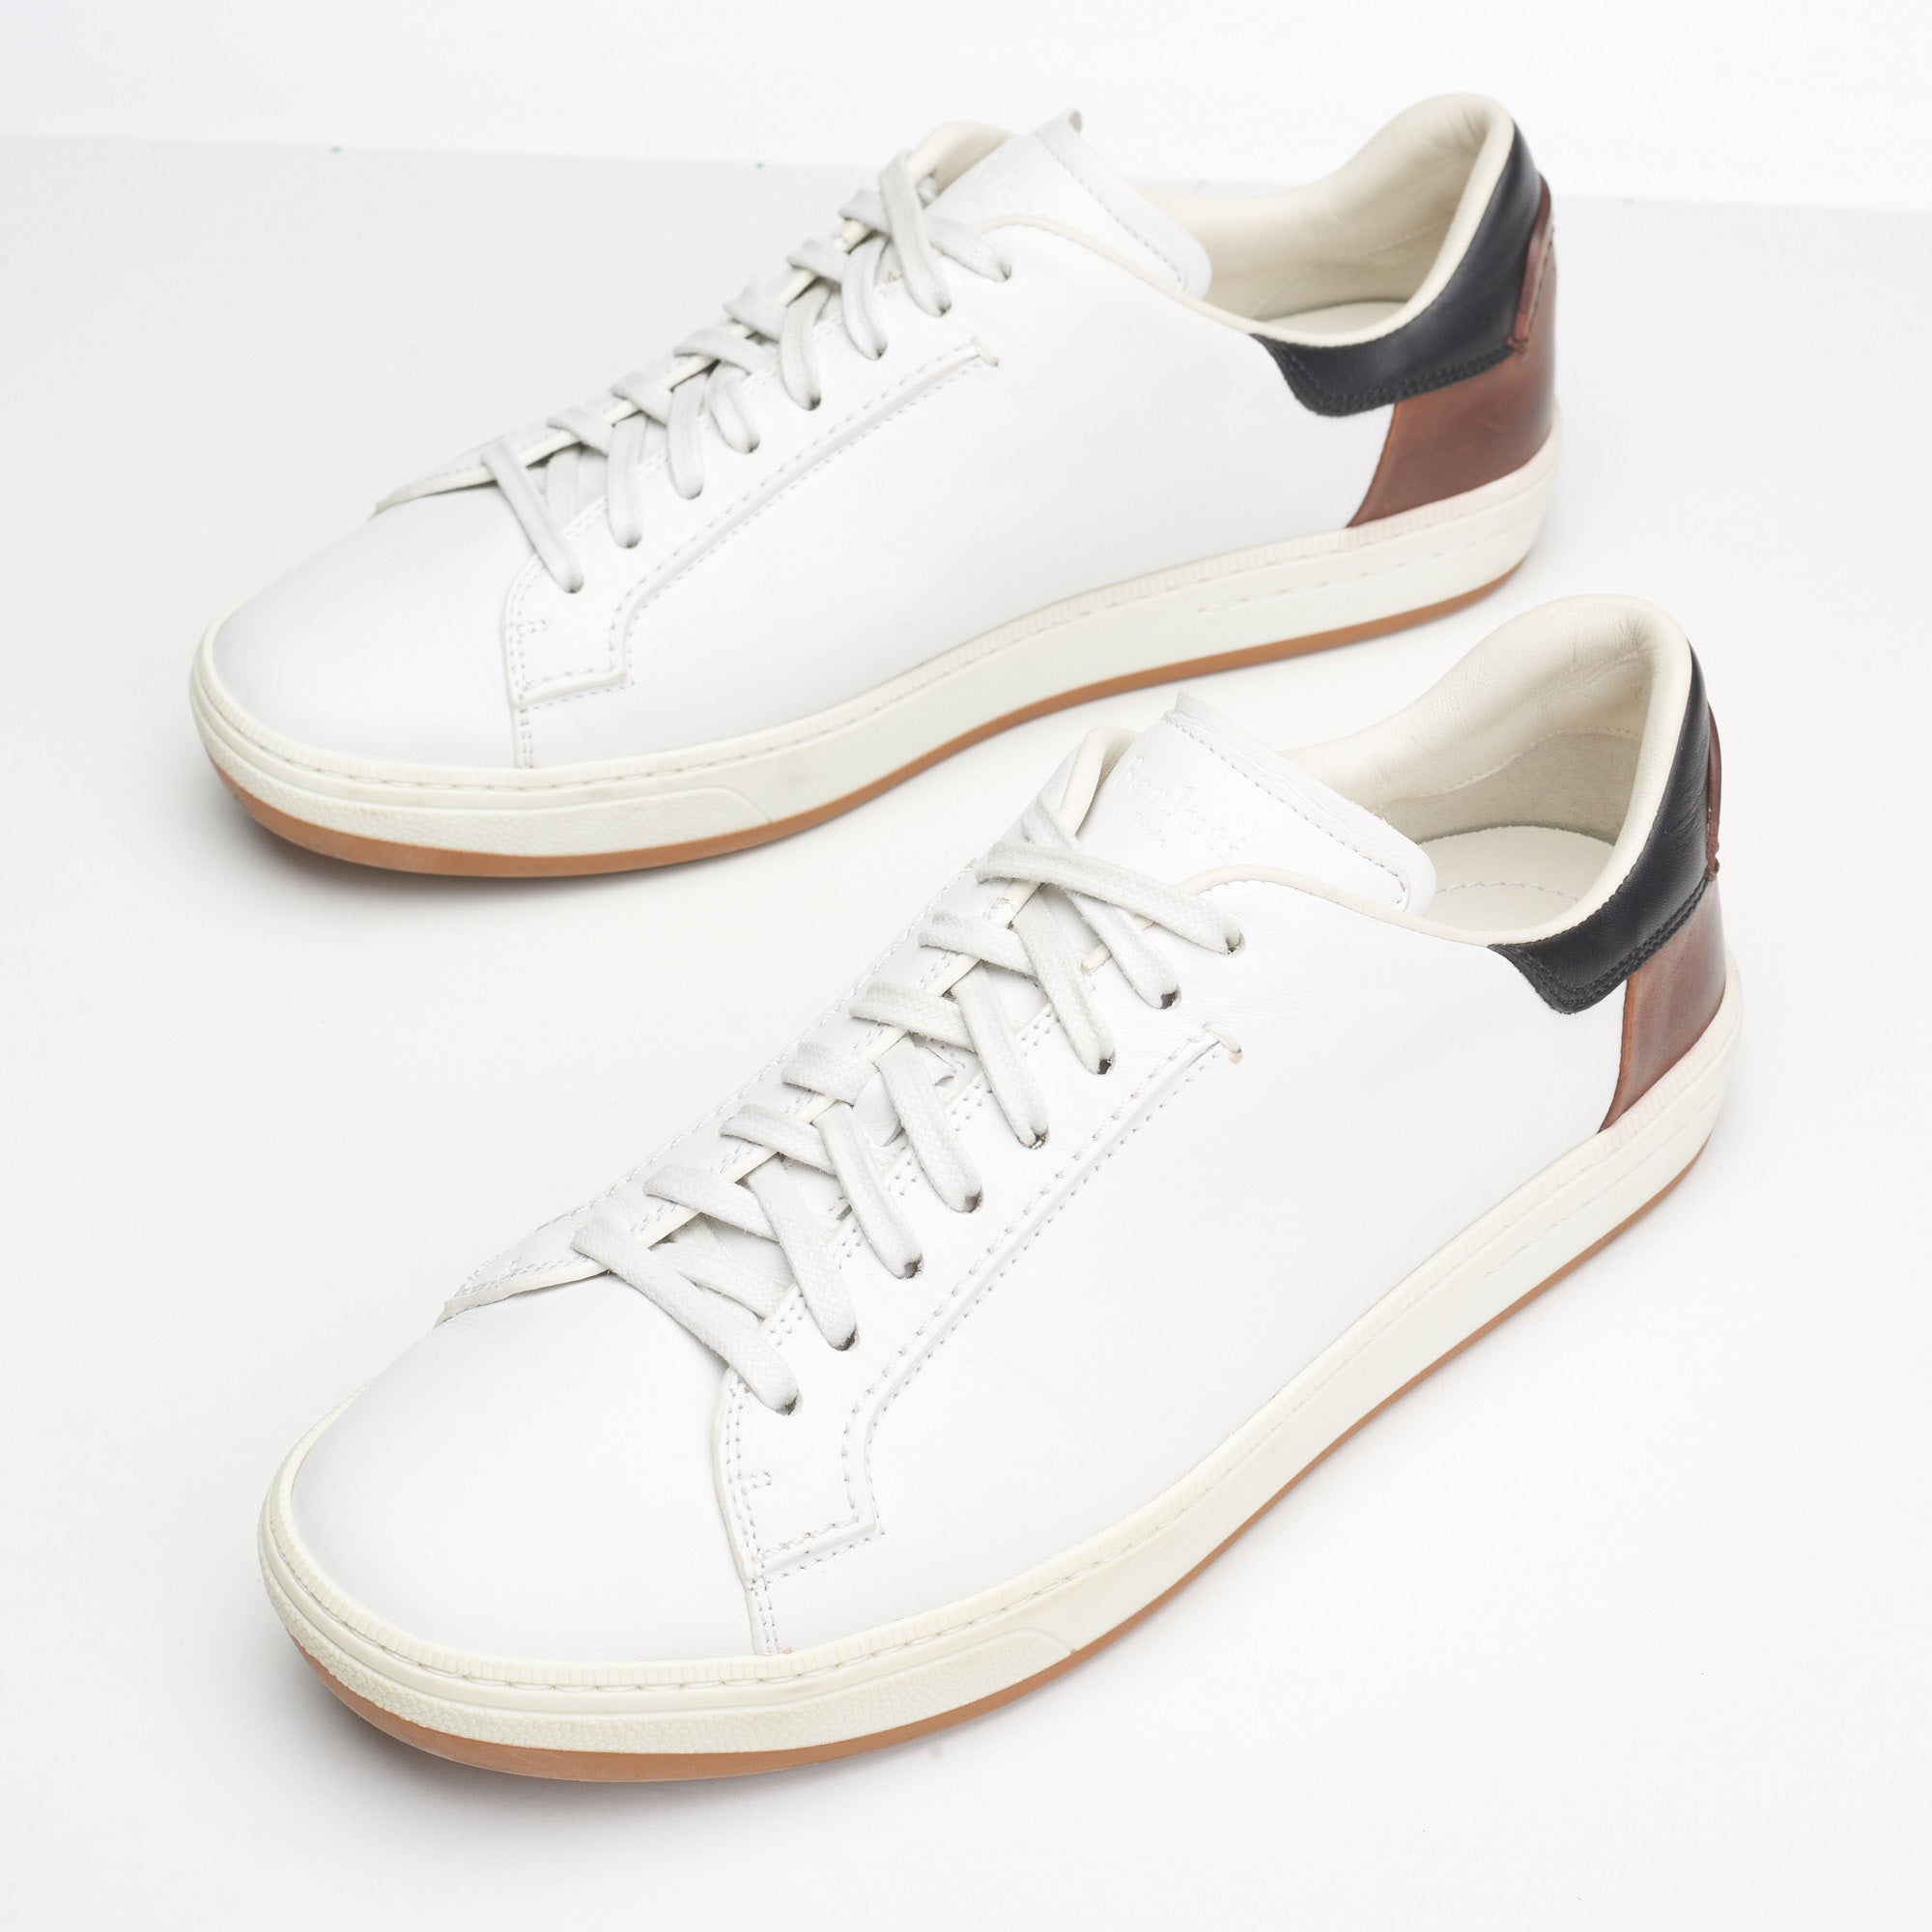 BERLUTI Paris White Leather 8 Eyelet Lace-up Sneaker Shoes Size 6.5 US